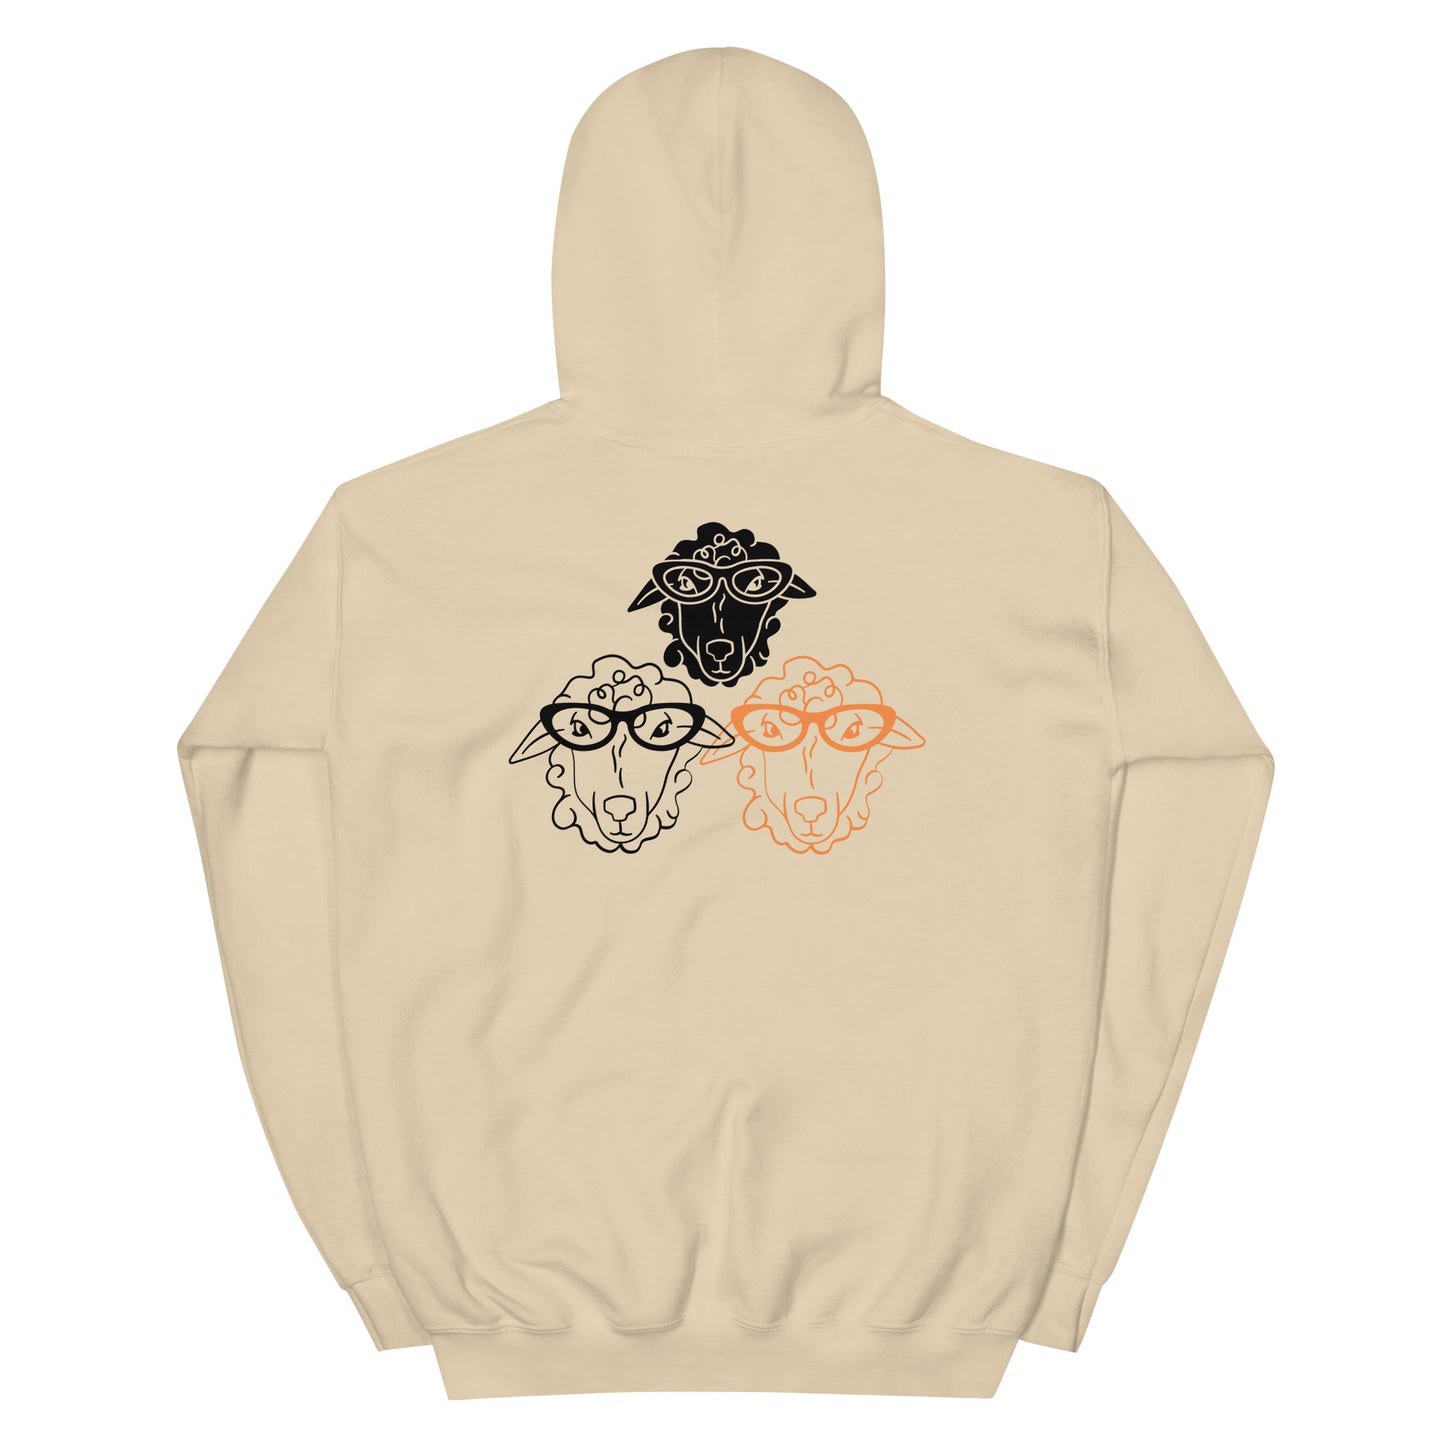 Leave The Past (Graphic Hoodie)